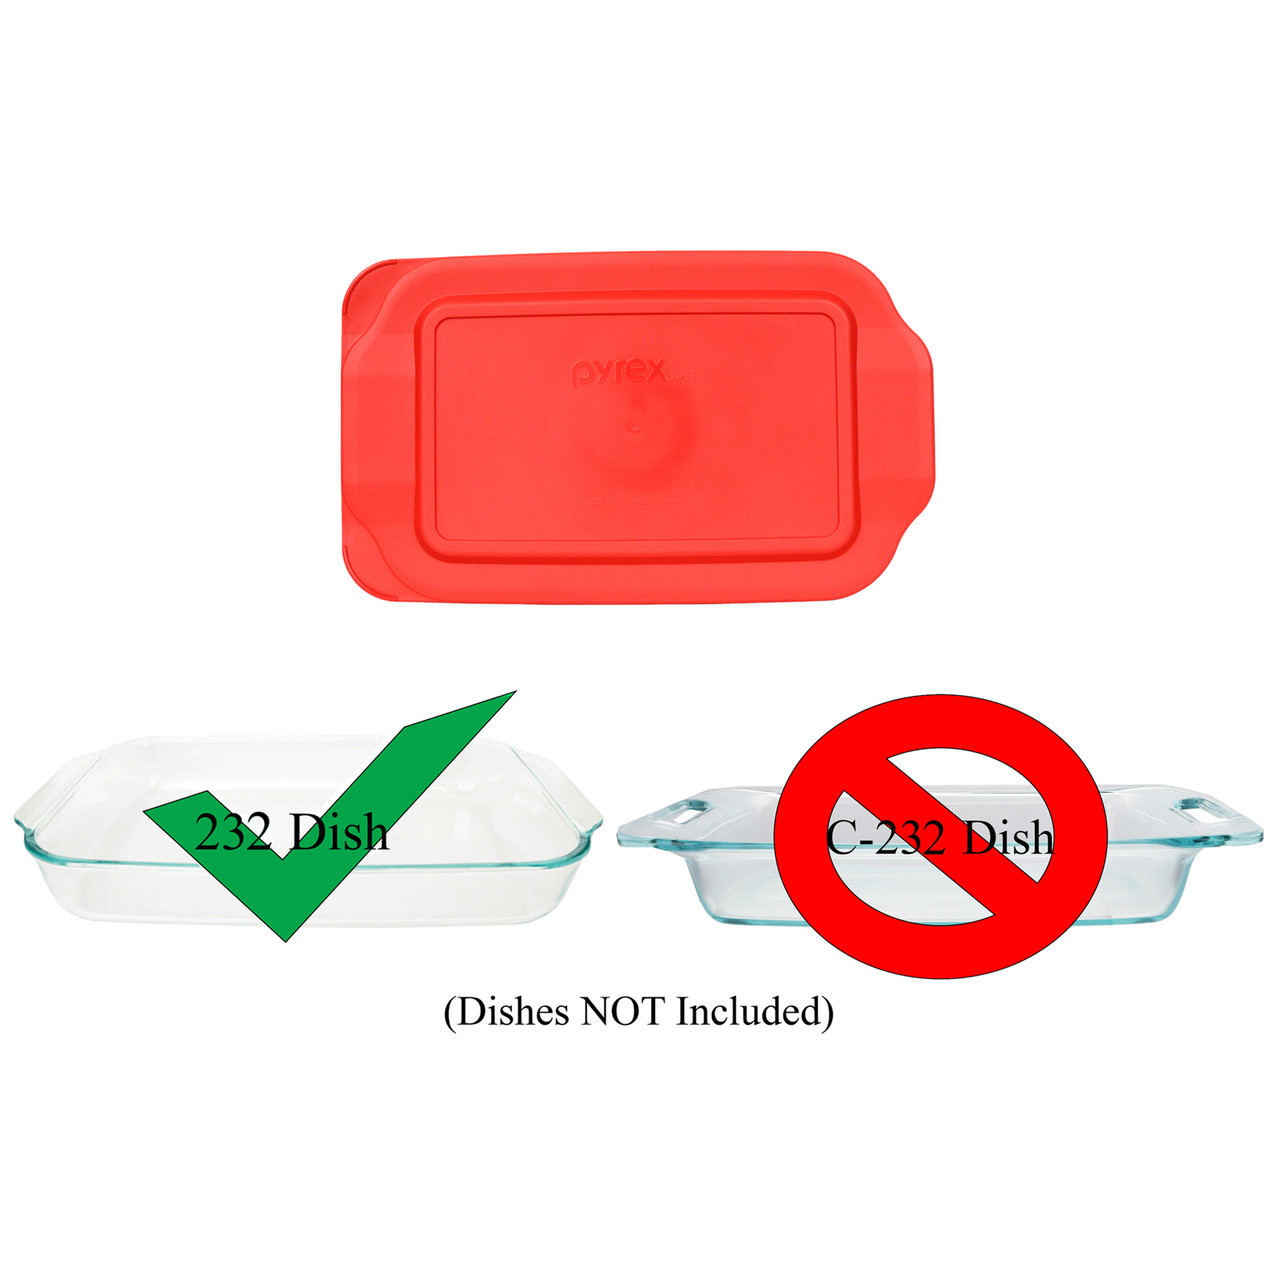  Pyrex Basics 3 Quart Glass Oblong Baking Dish with Red Plastic  Lid -13.2 INCH x 8.9inch x 2 inch: Home & Kitchen